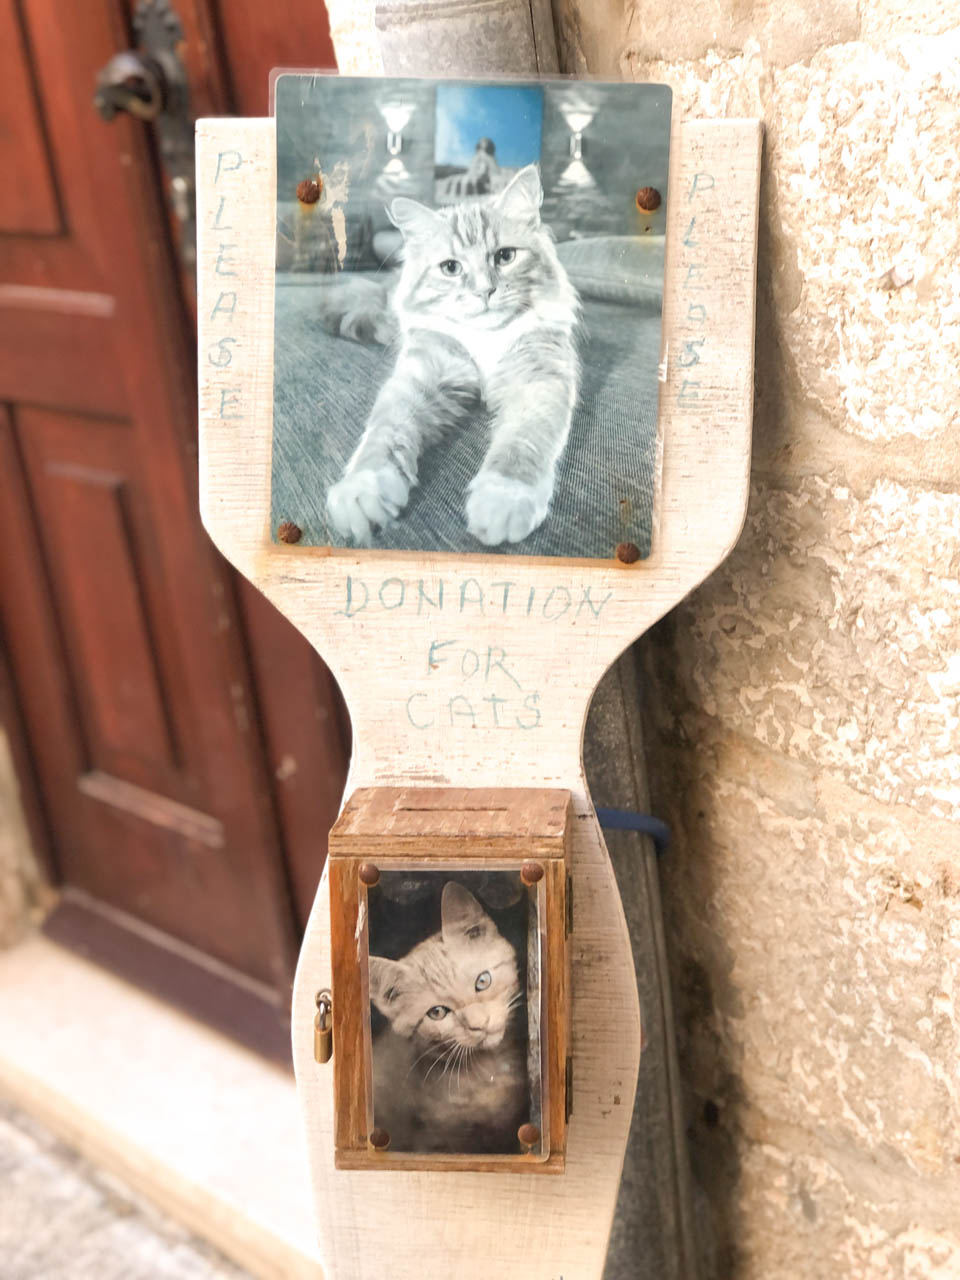 Donation box for cats in Dubrovnik Old Town